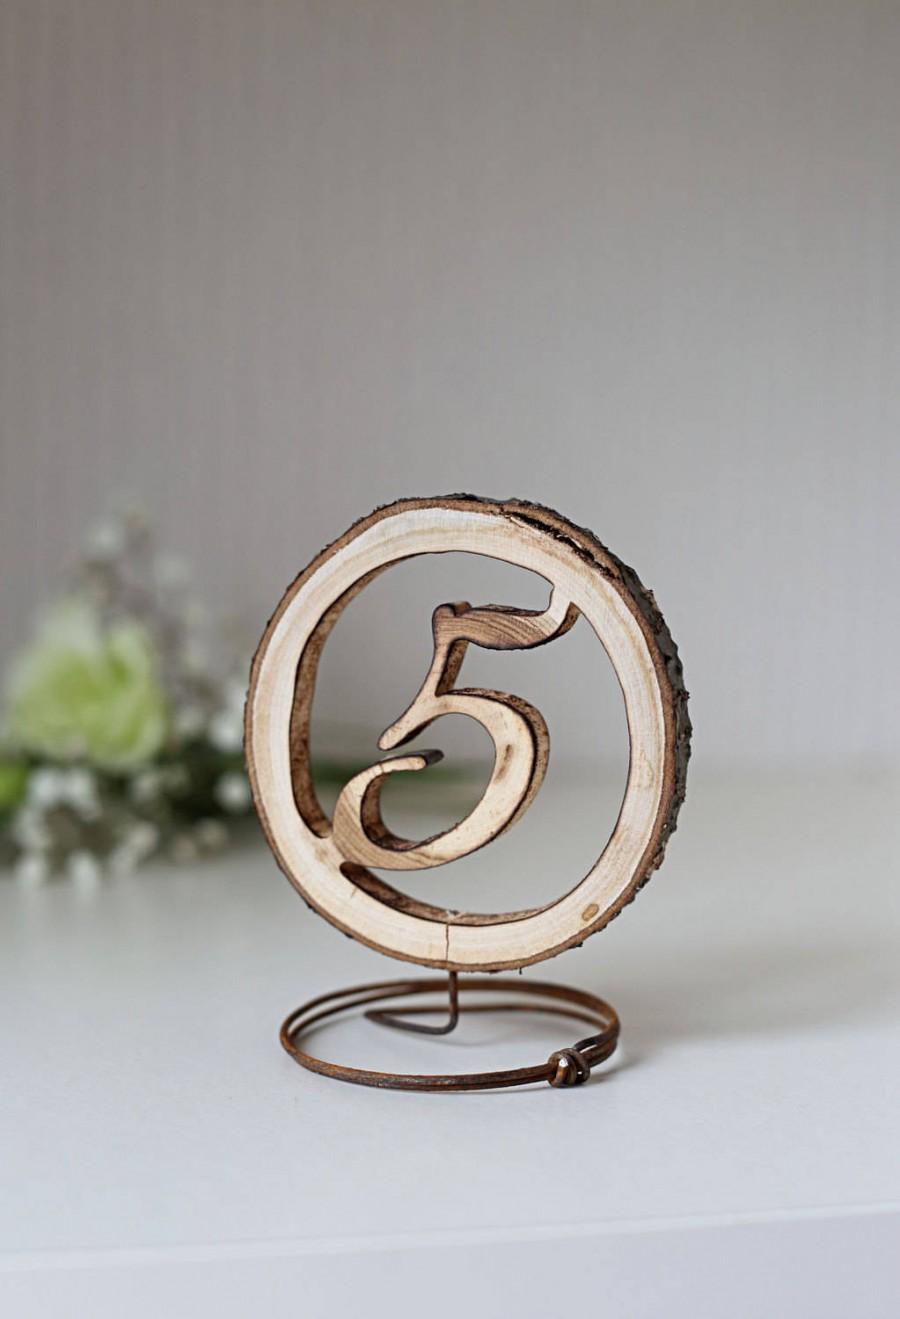 Свадьба - Table numbers for wedding, rustic table numbers, free standing table numbers, table numbers, wedding table numbers, event table numbers